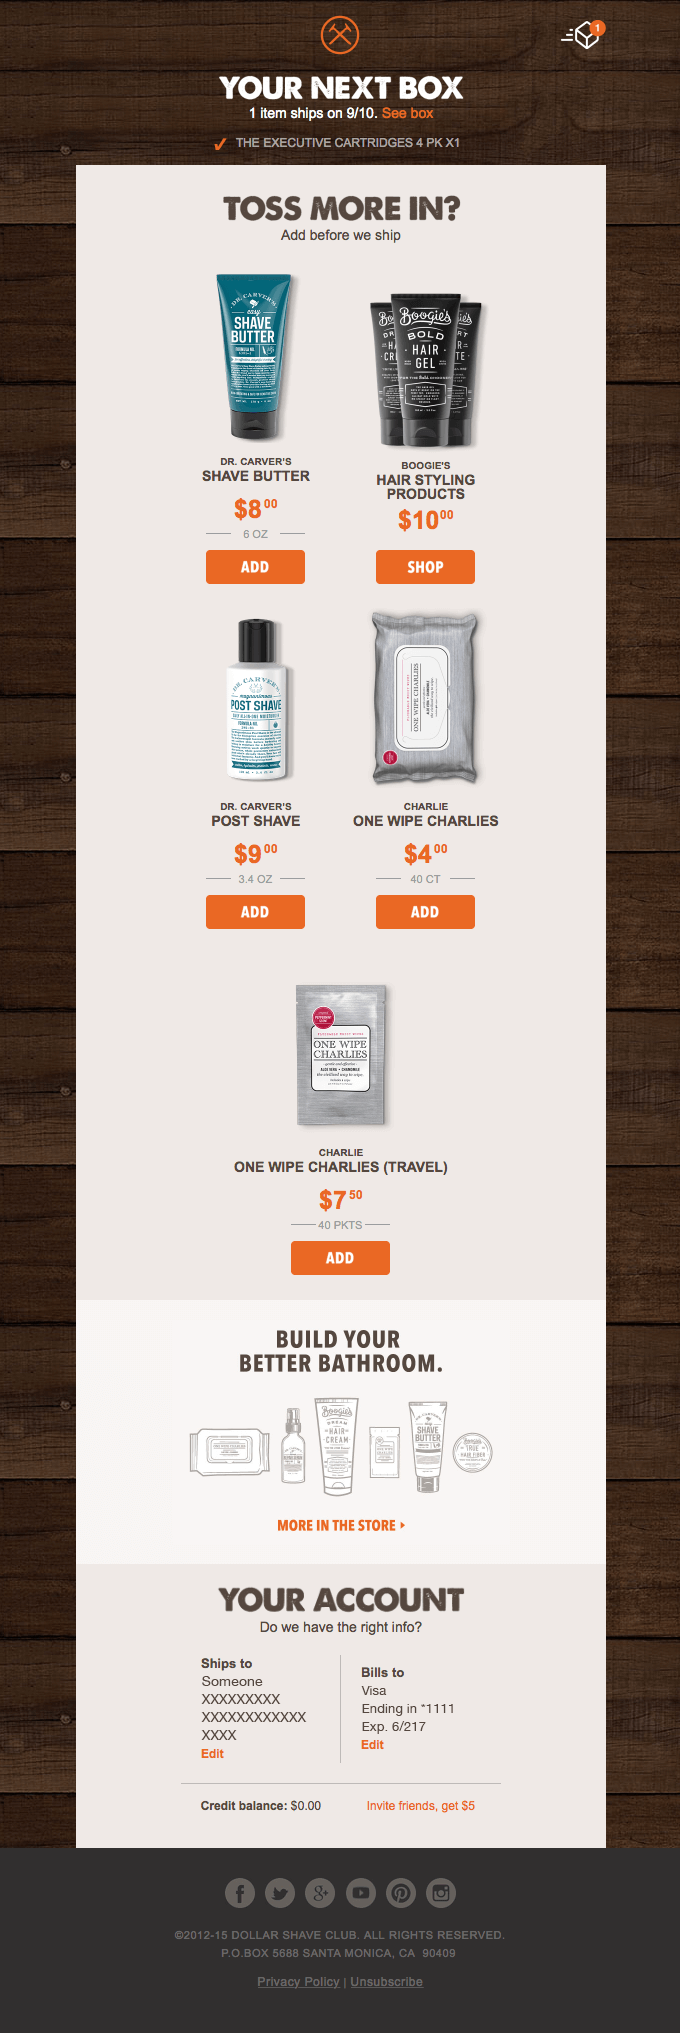 the dollar shave club cross-sell email 